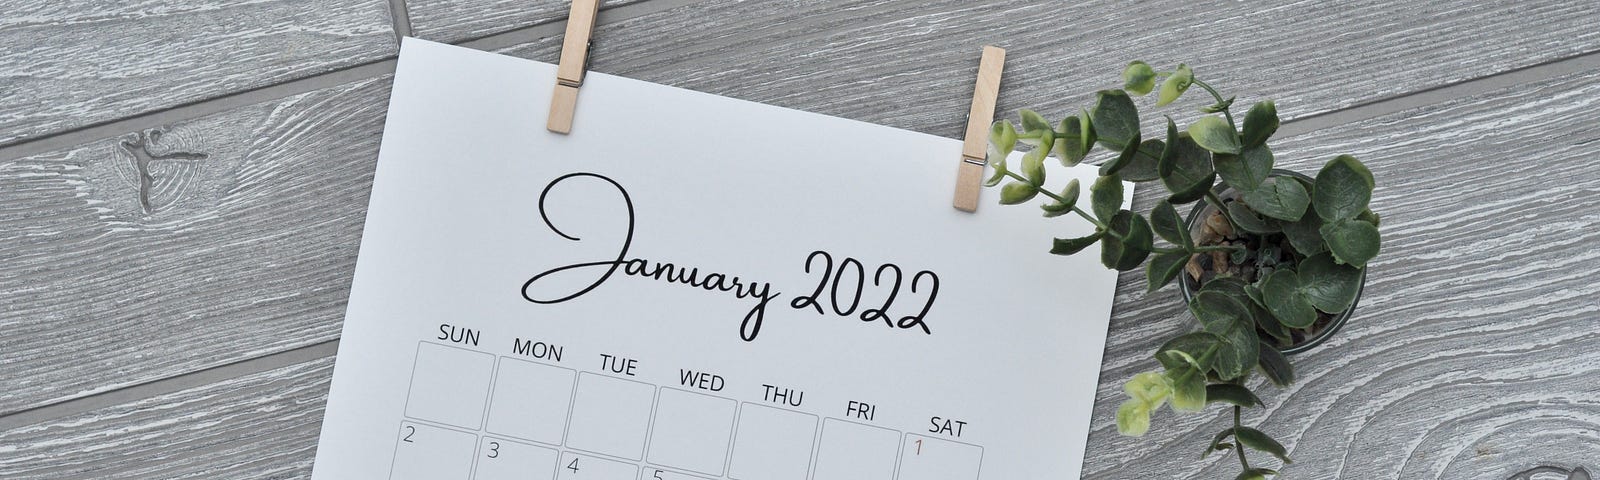 A calendar is open to January 2022